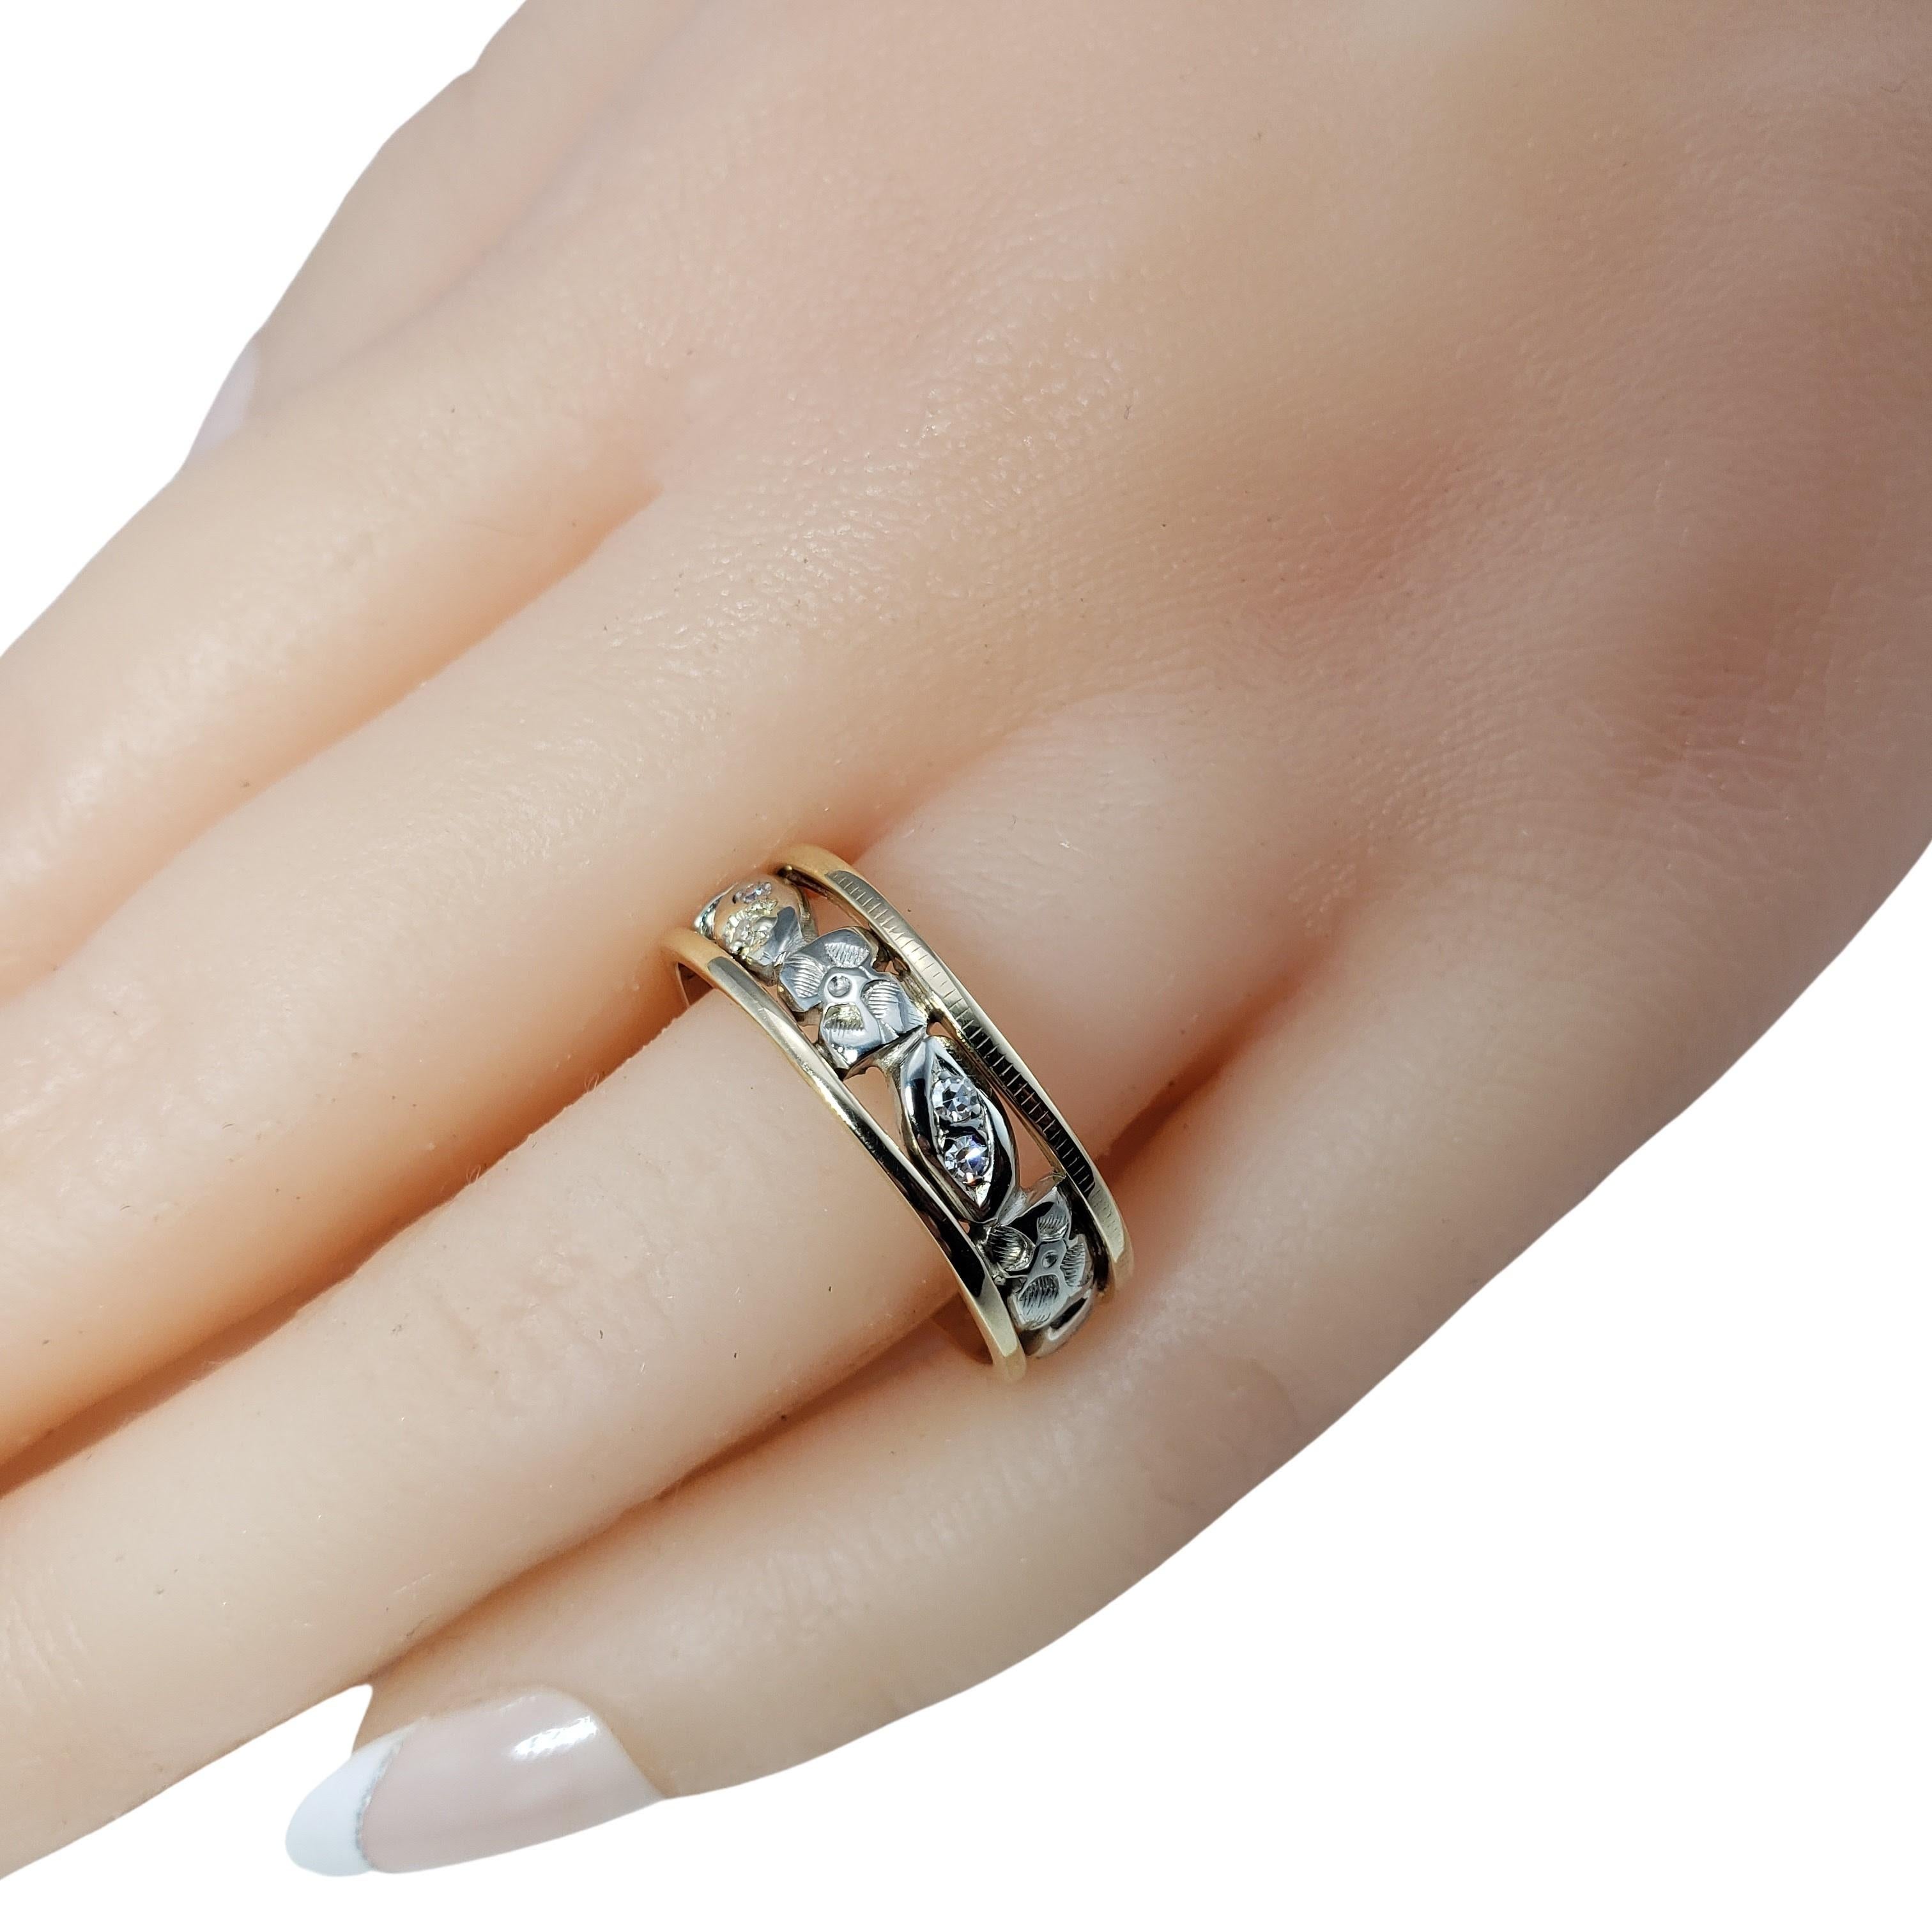 Vintage 14 Karat Yellow/White Gold and Diamond Leaf Pattern Band Ring Size 9.25-

This elegant 14K yellow and white gold ring features a lovely leaf pattern accented with 10 round single cut diamonds. Width: 7 mm.

Approximate total diamond weight: